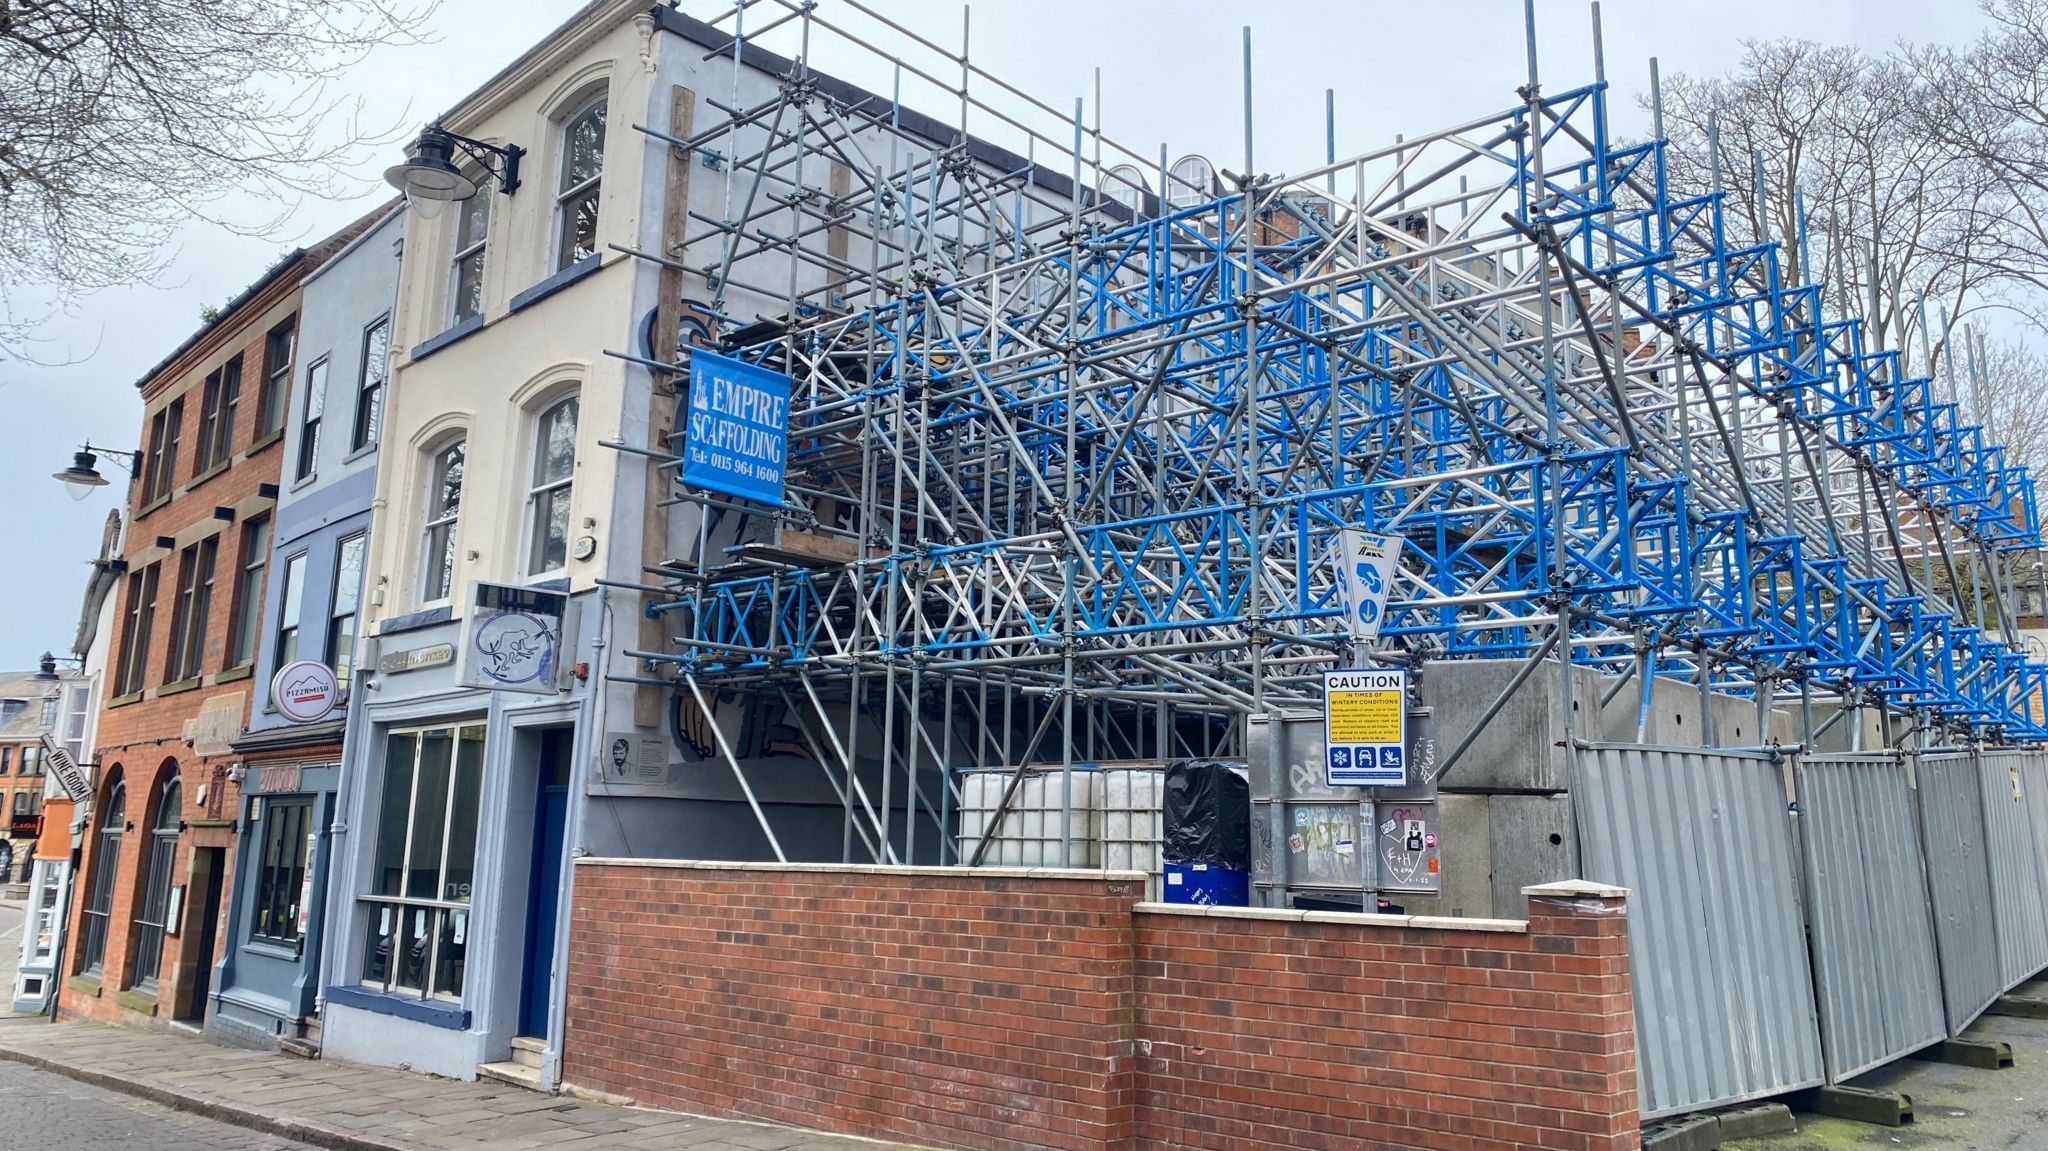 Scaffolding on side of the building